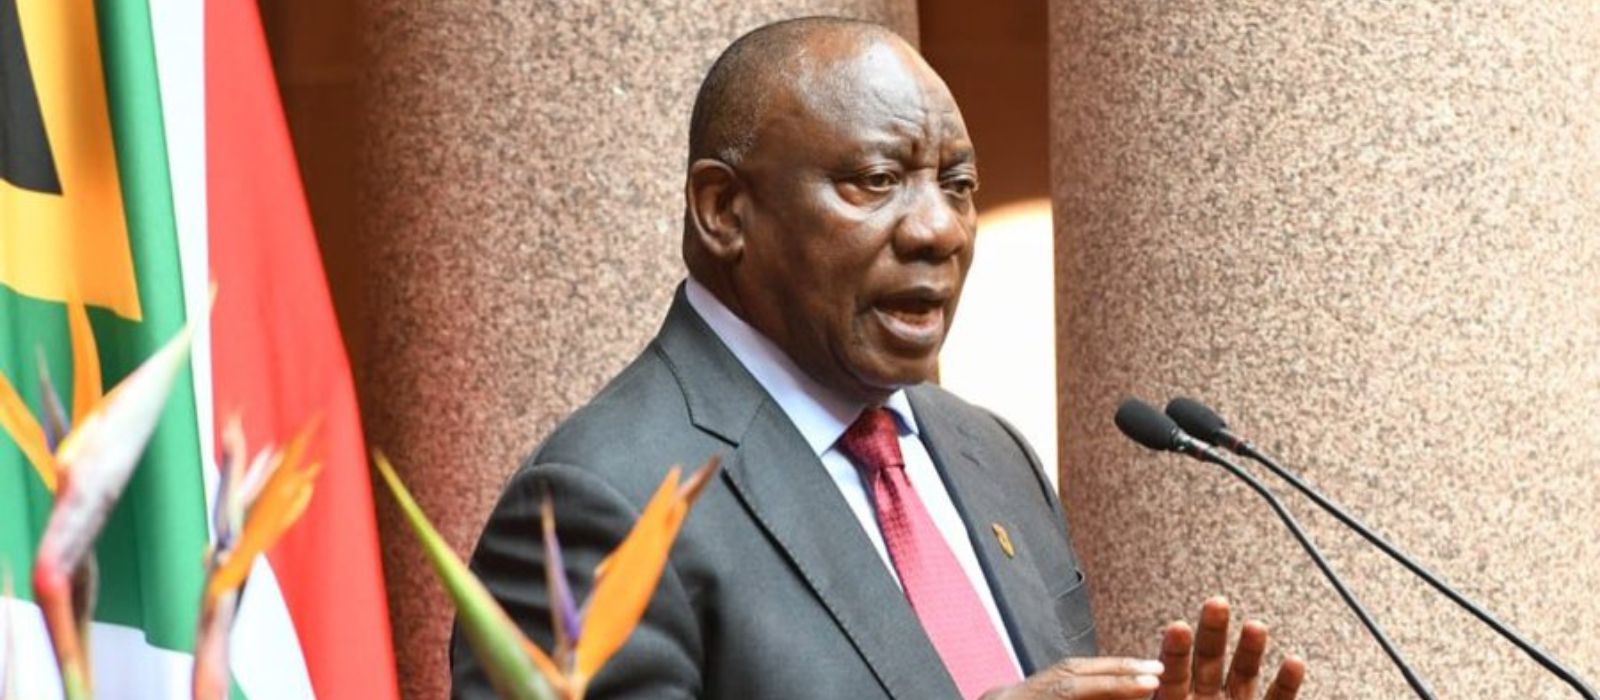 President Ramaphosa to participate in official election result announcement ceremony